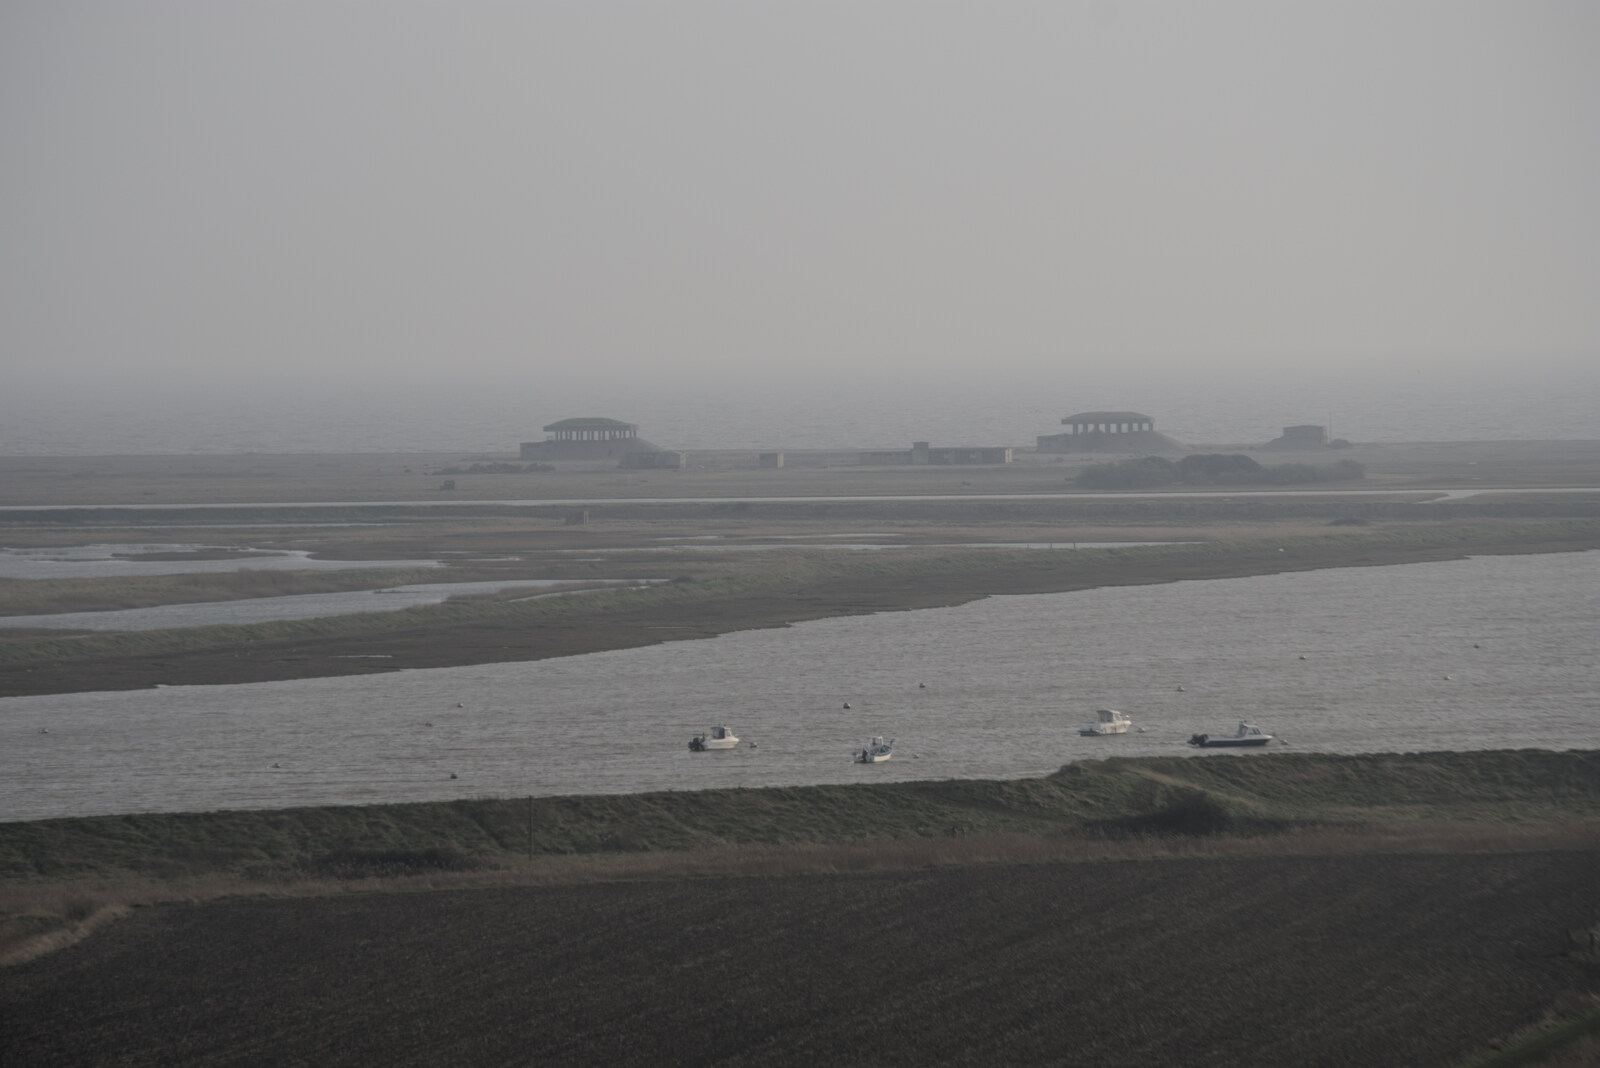 A Trip to Orford, Suffolk - 25th January 2020: The Orford Ness pagodas